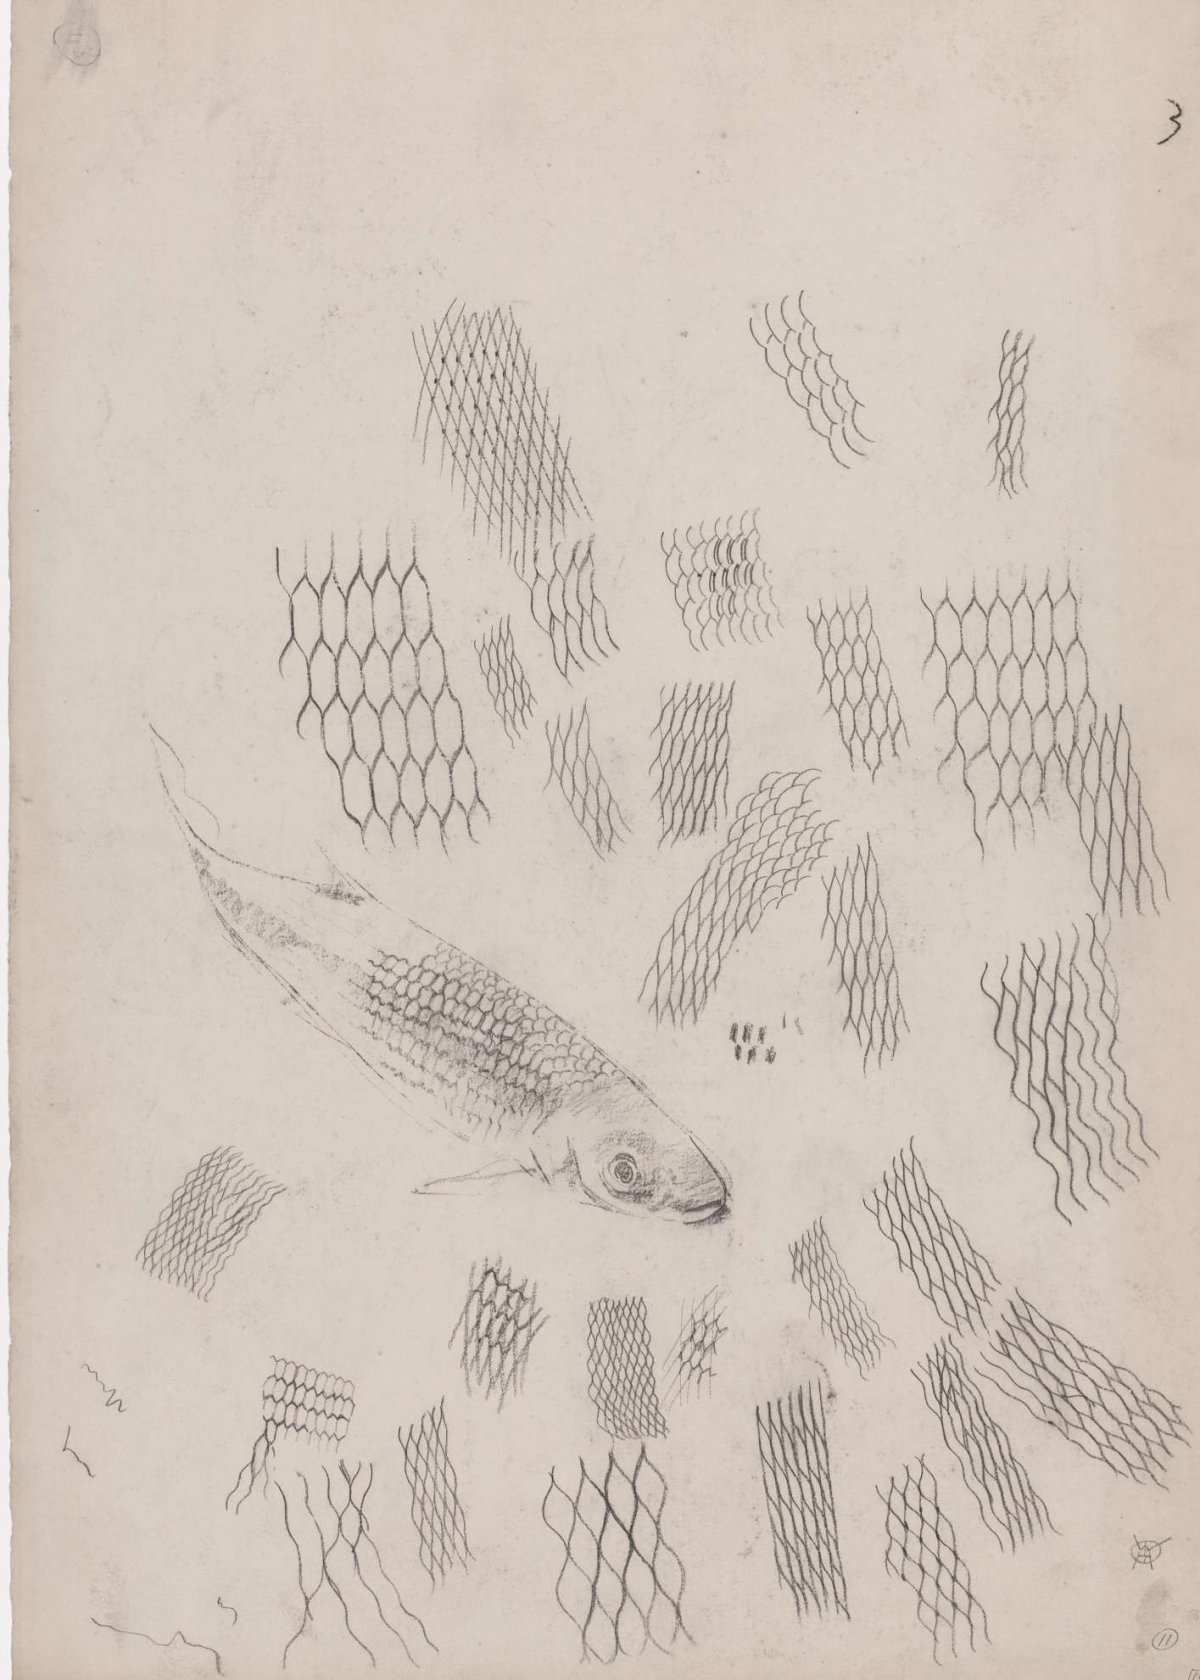 Sketch sheet with studies of gold winds and scales study, Gerrit Willem Dijsselhof, 1876 - 1924